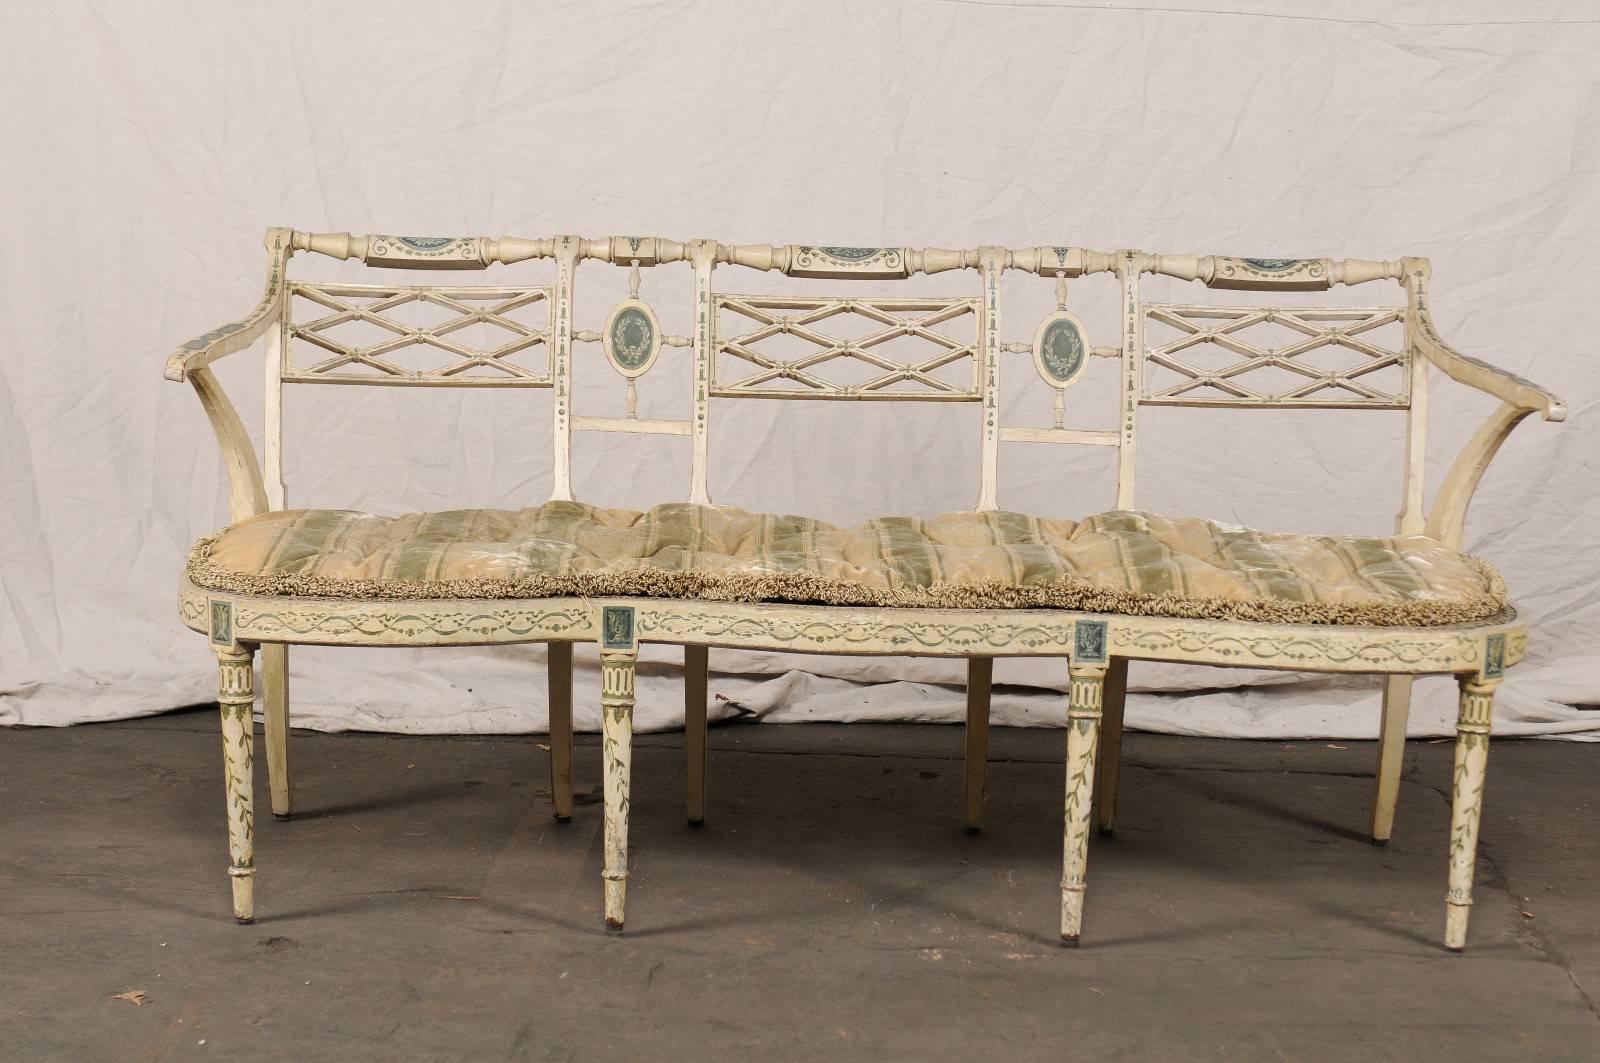 19th century English Sheraton painted decorated and caned settee, triple chair back design.